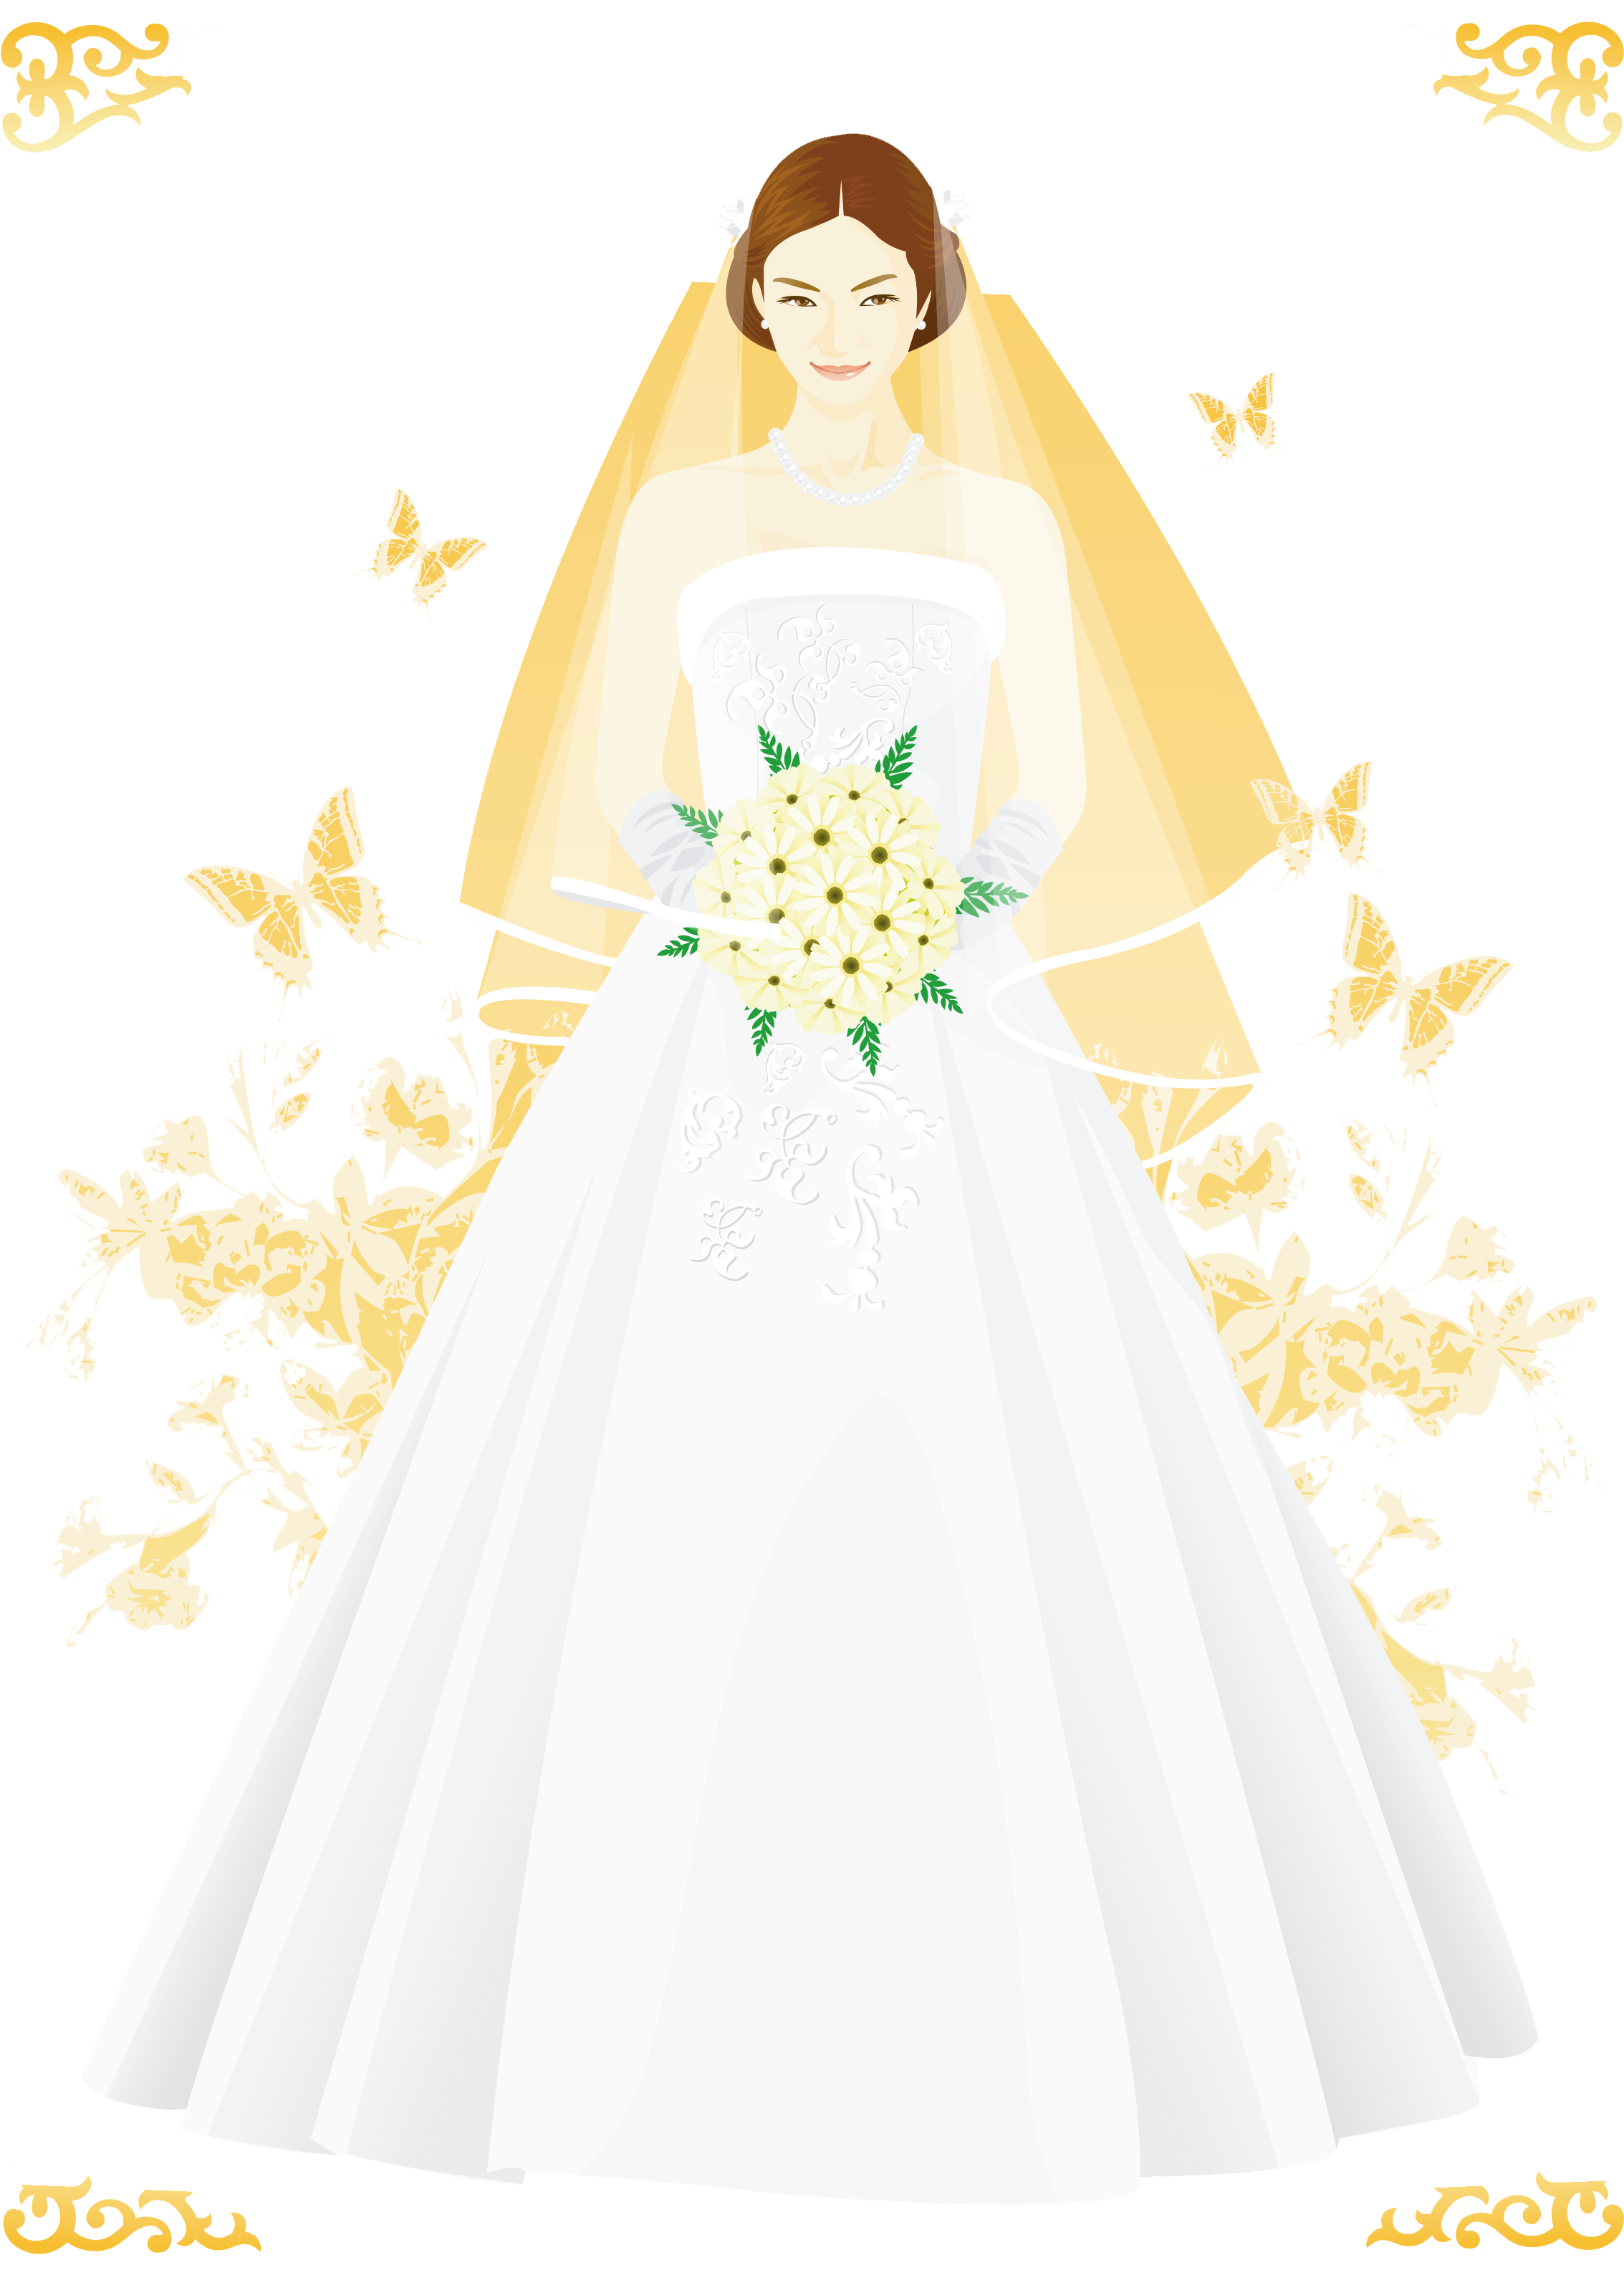 Download Bride Marriage Cartoon Veil Handpainted - Wedding Dress PNG Image  with No Background 